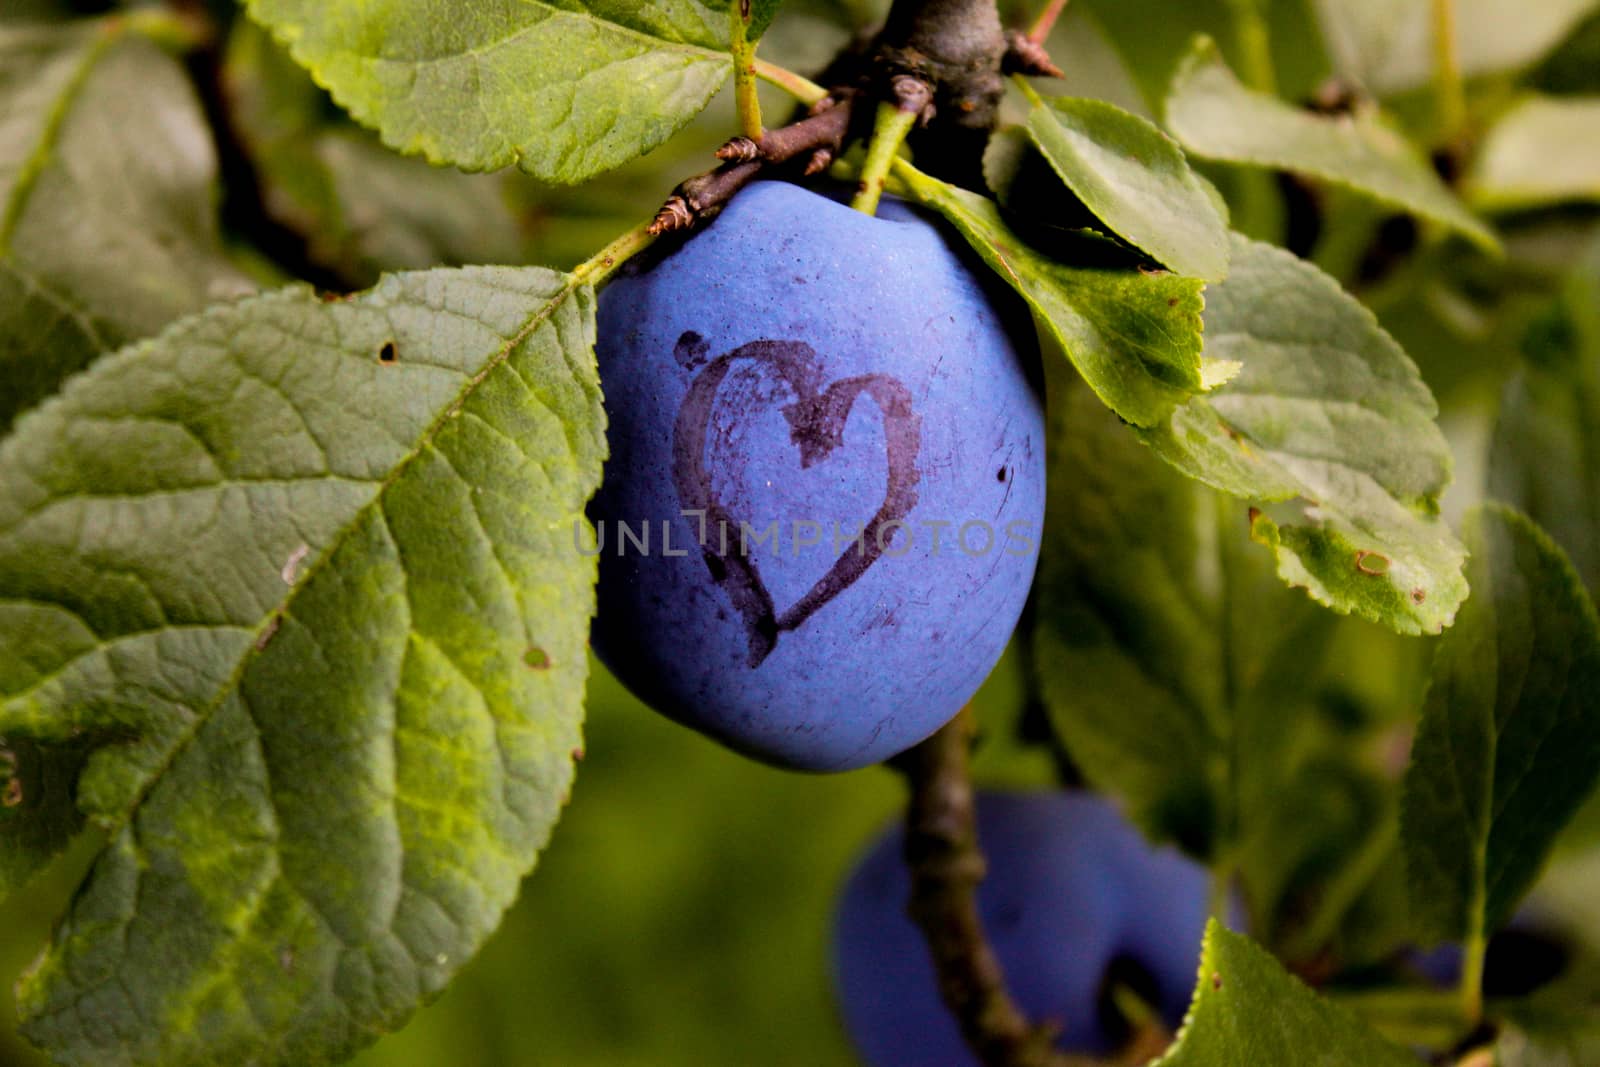 Among the leaves is a blue ripe plum on which a heart is drawn. by mahirrov